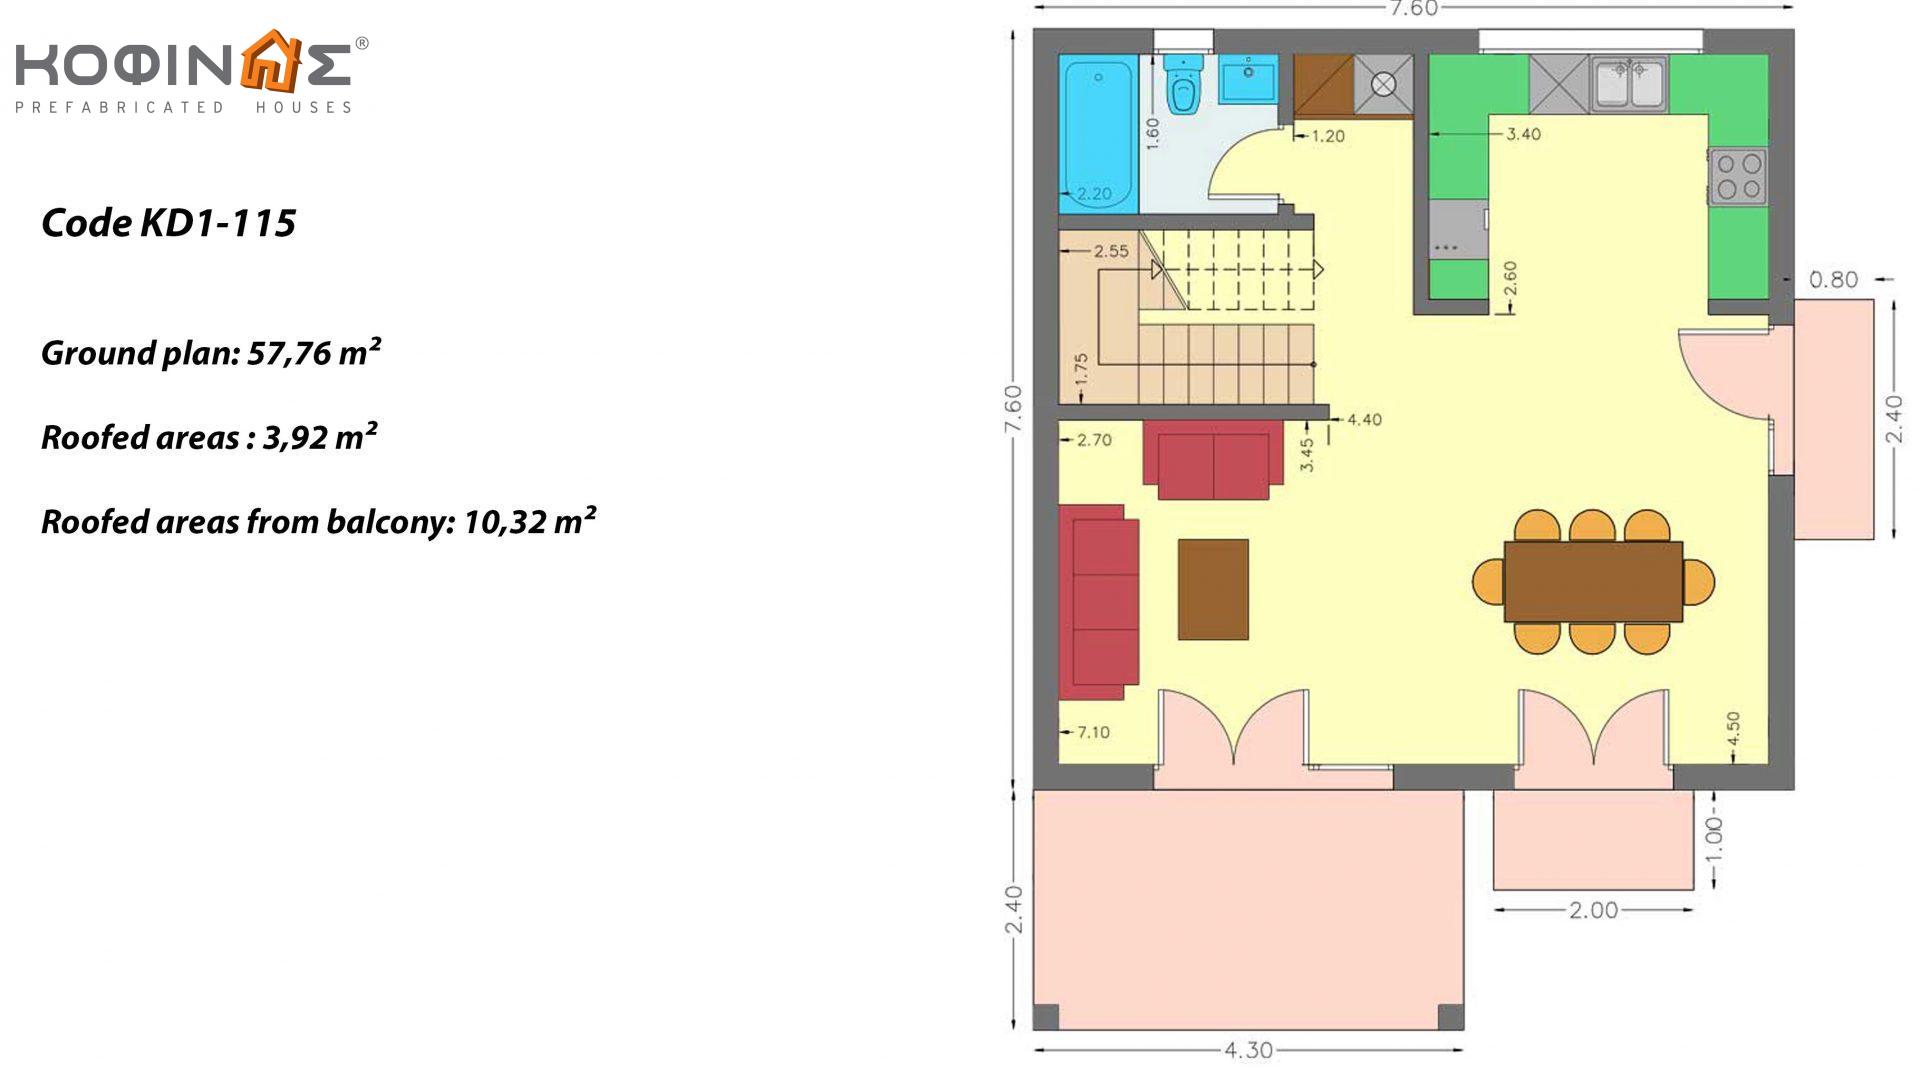 2-story house KD1-115, total surface of 115,52 m² ,covered roofed areas 24.56 m²,balconies 10.32 m²